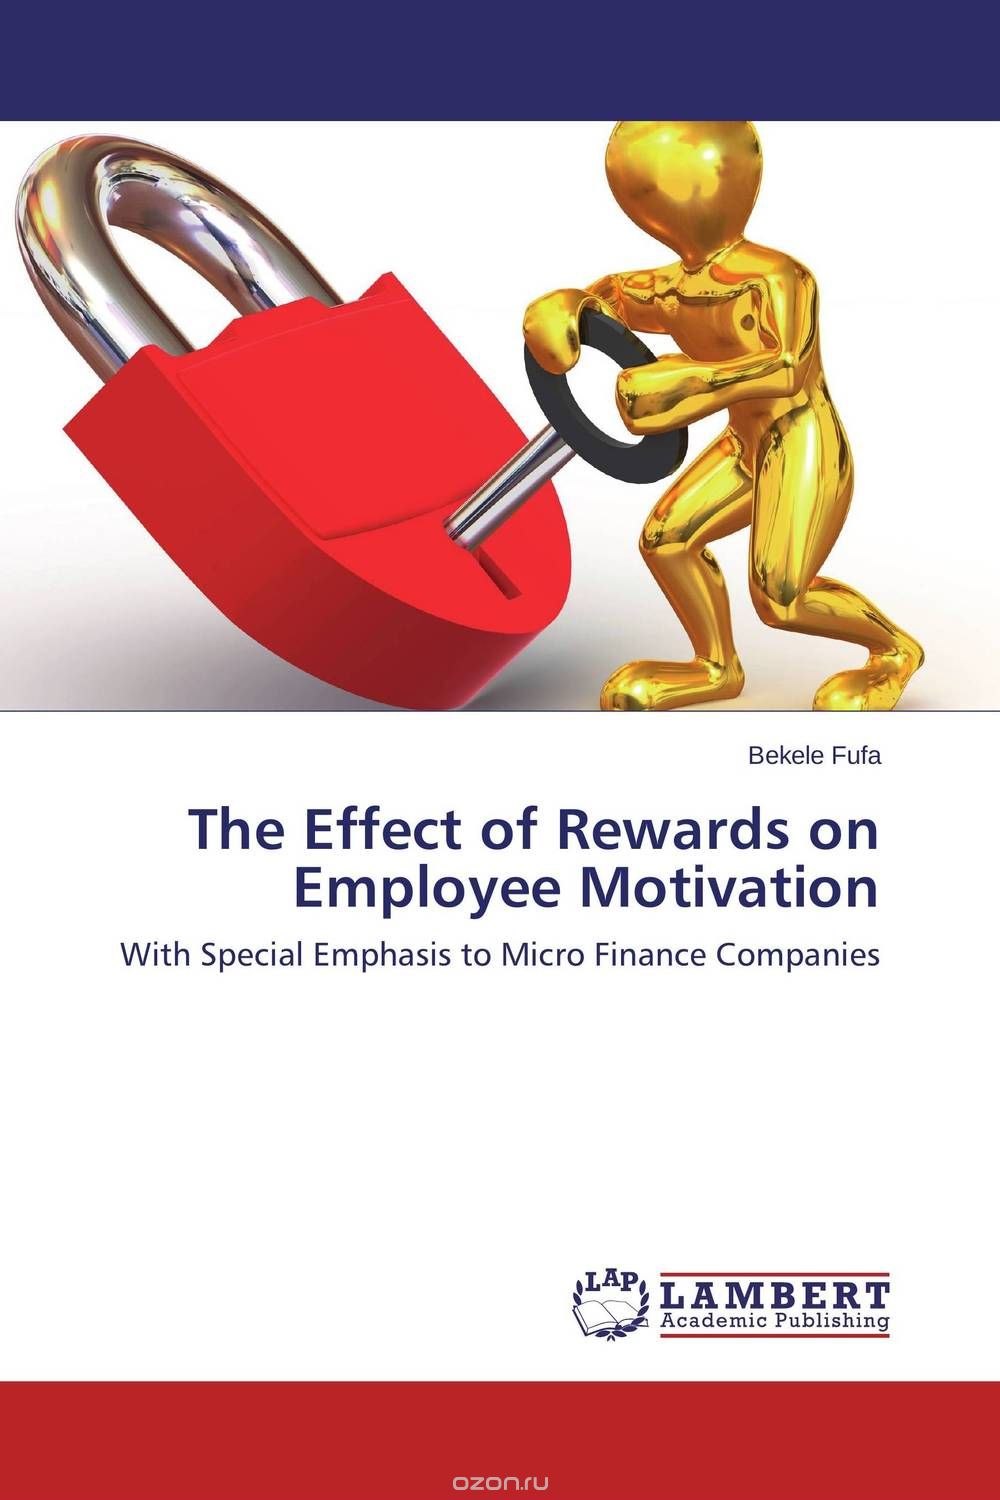 The Effect of Rewards on Employee Motivation